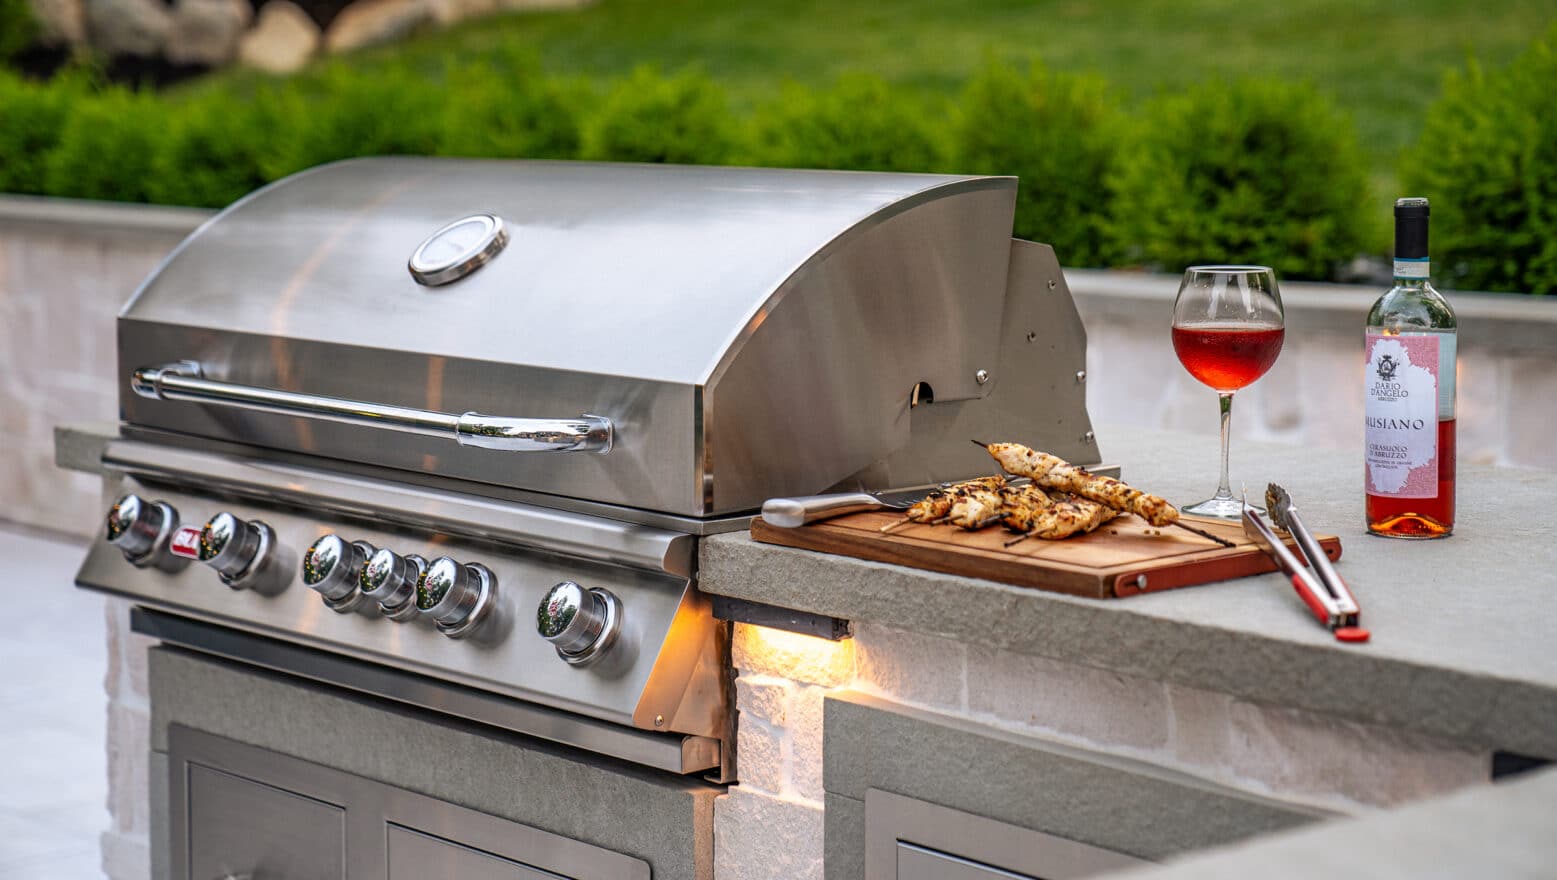 An outdoor kitchen with stainless steel grill and freshly prepared grilled chicken with red wine.